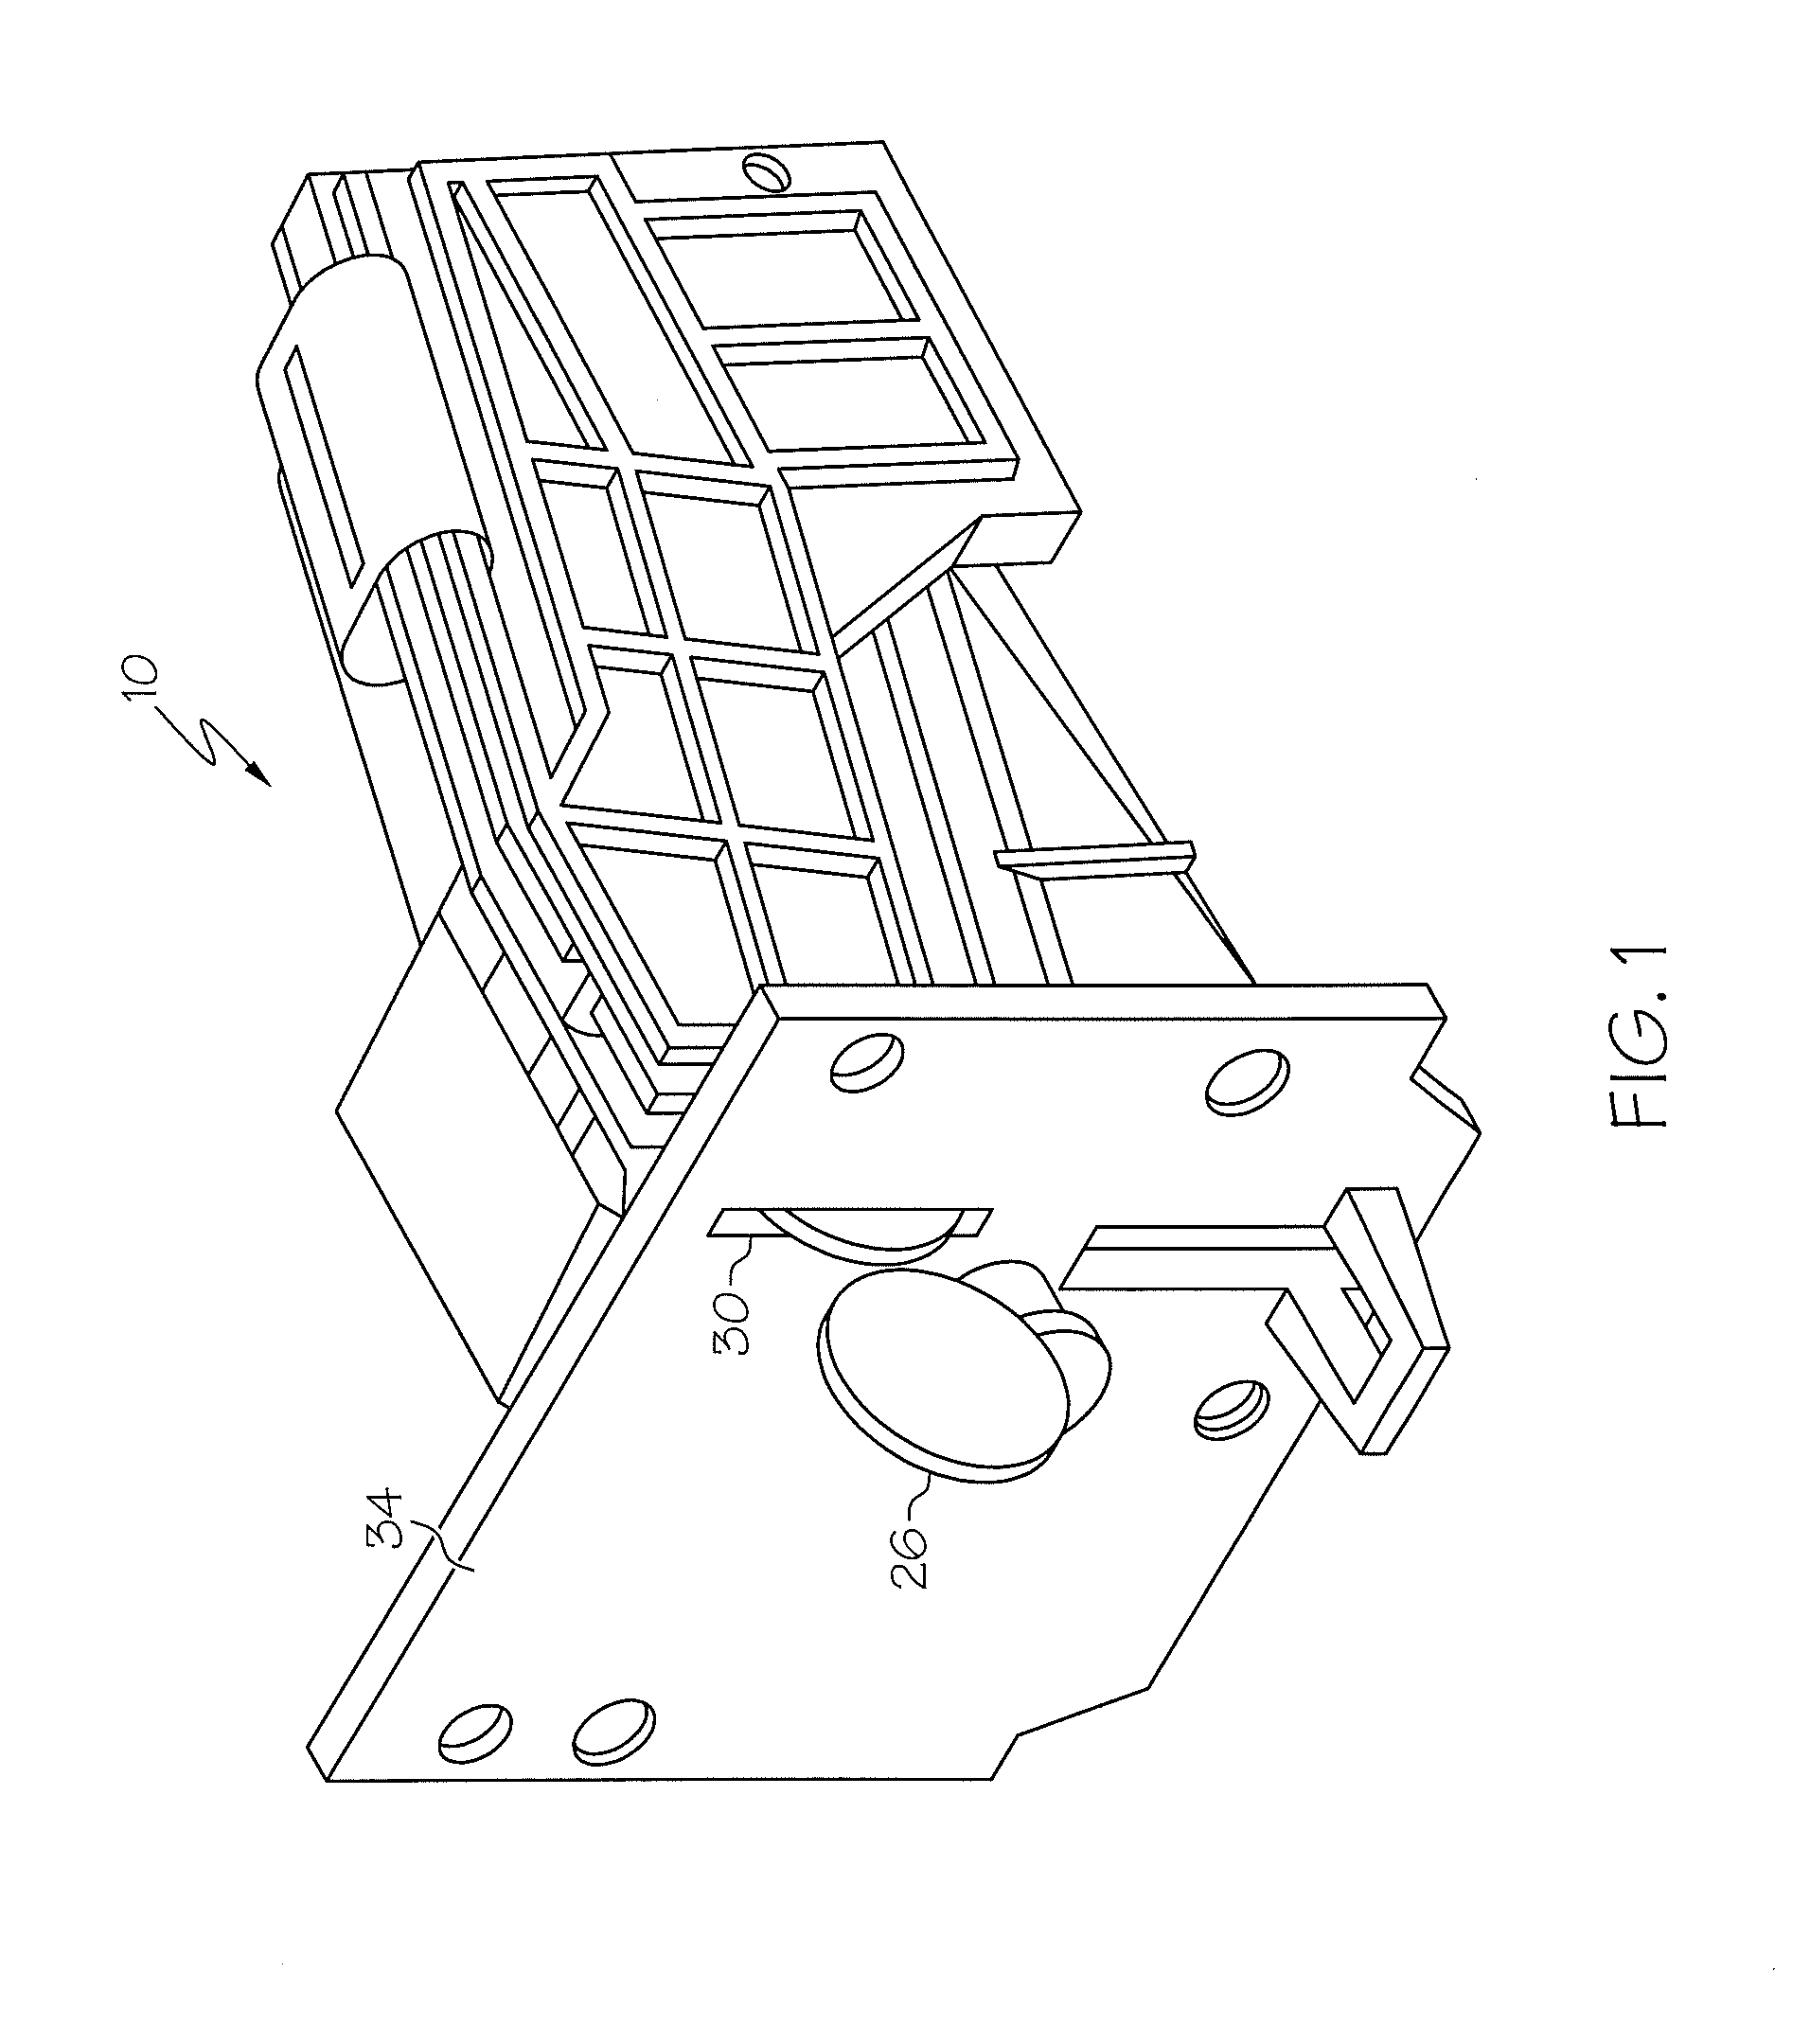 Media recognition device and method